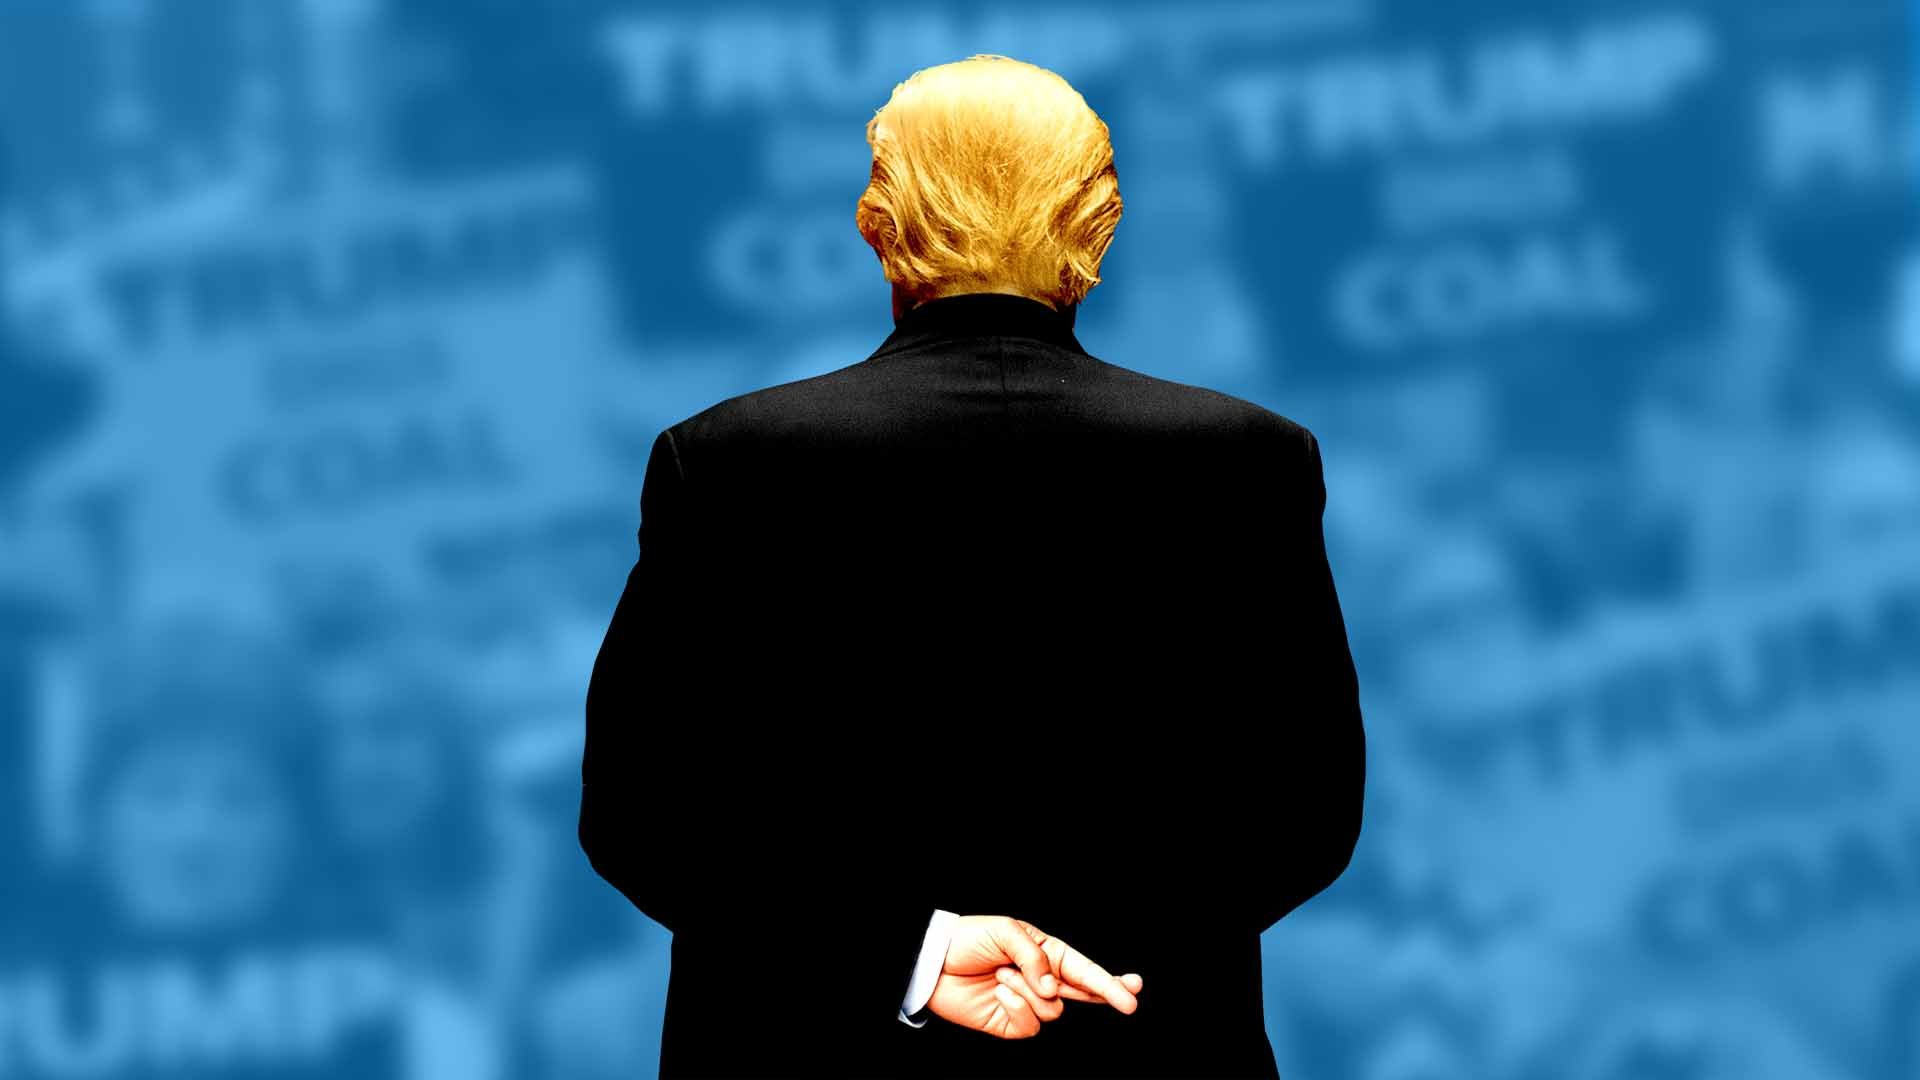 Illustration of President Trump standing with his back turned, with his fingers crossed behind his back